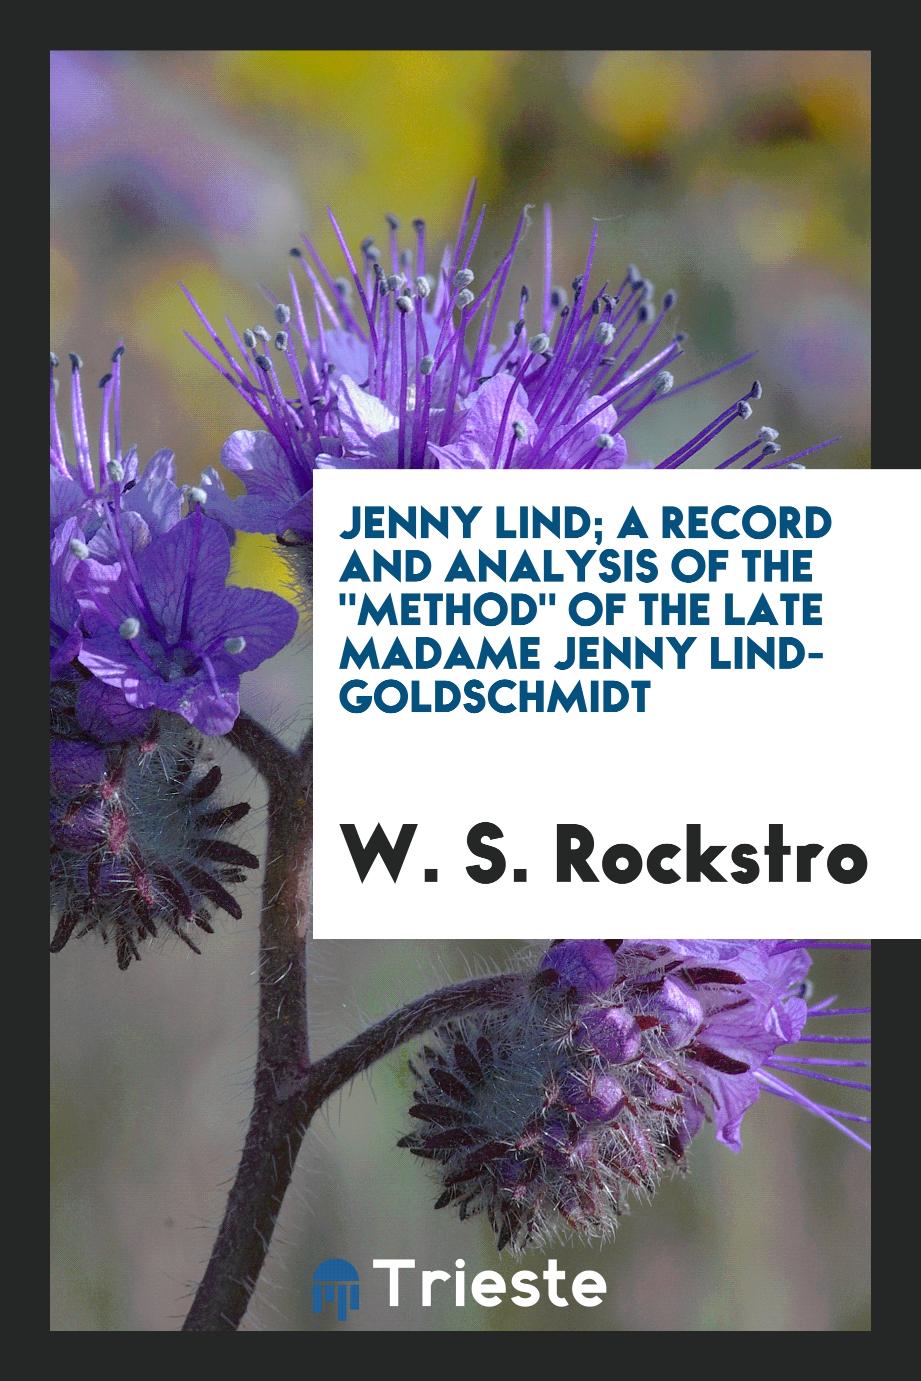 Jenny Lind; a record and analysis of the "method" of the late Madame Jenny Lind-Goldschmidt